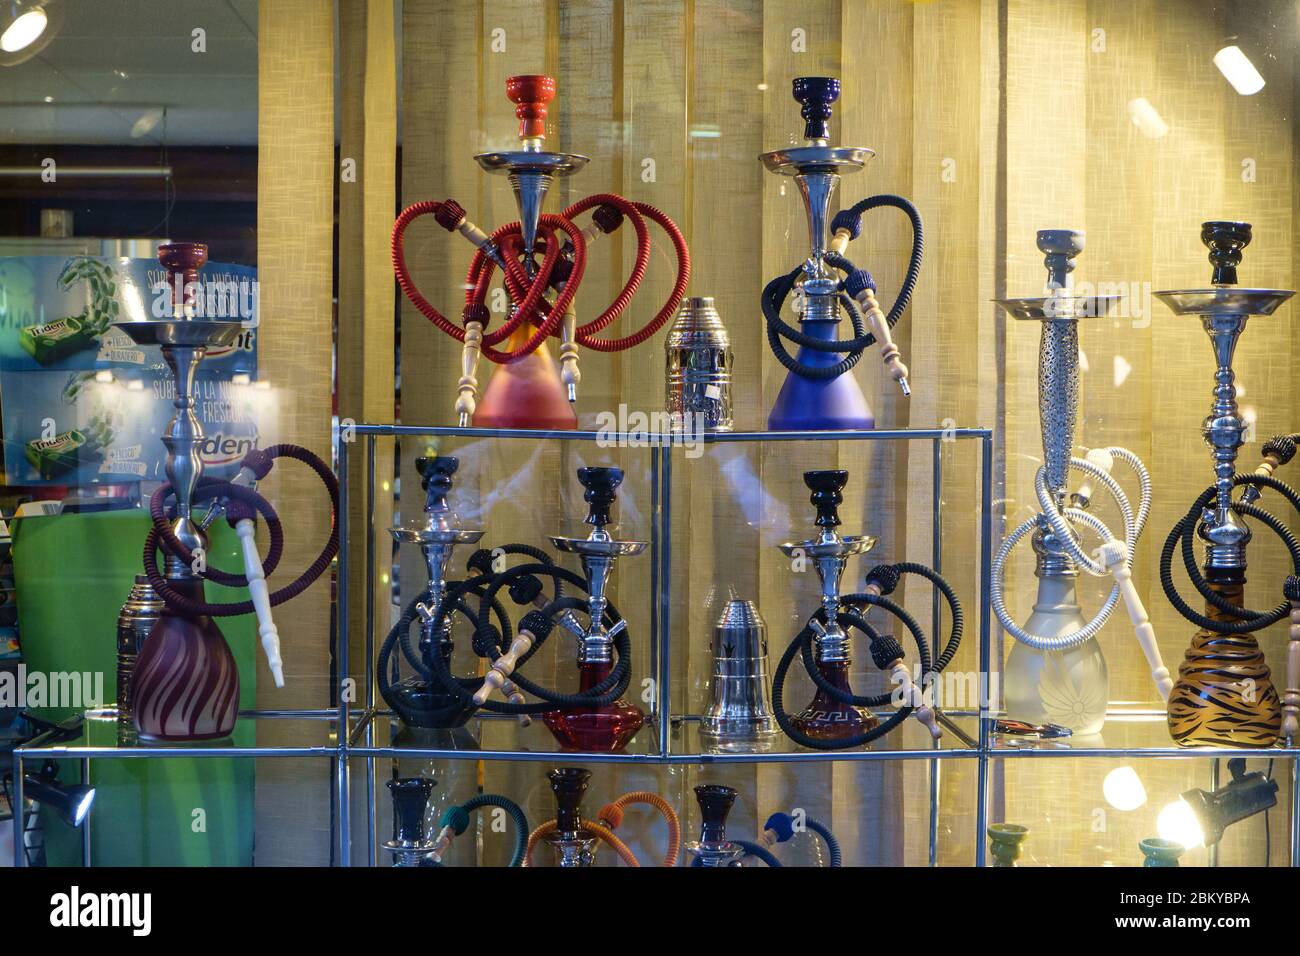 Decorative hookah pipes in a shop window in central Barcelona, Catalonia, Spain Stock Photo